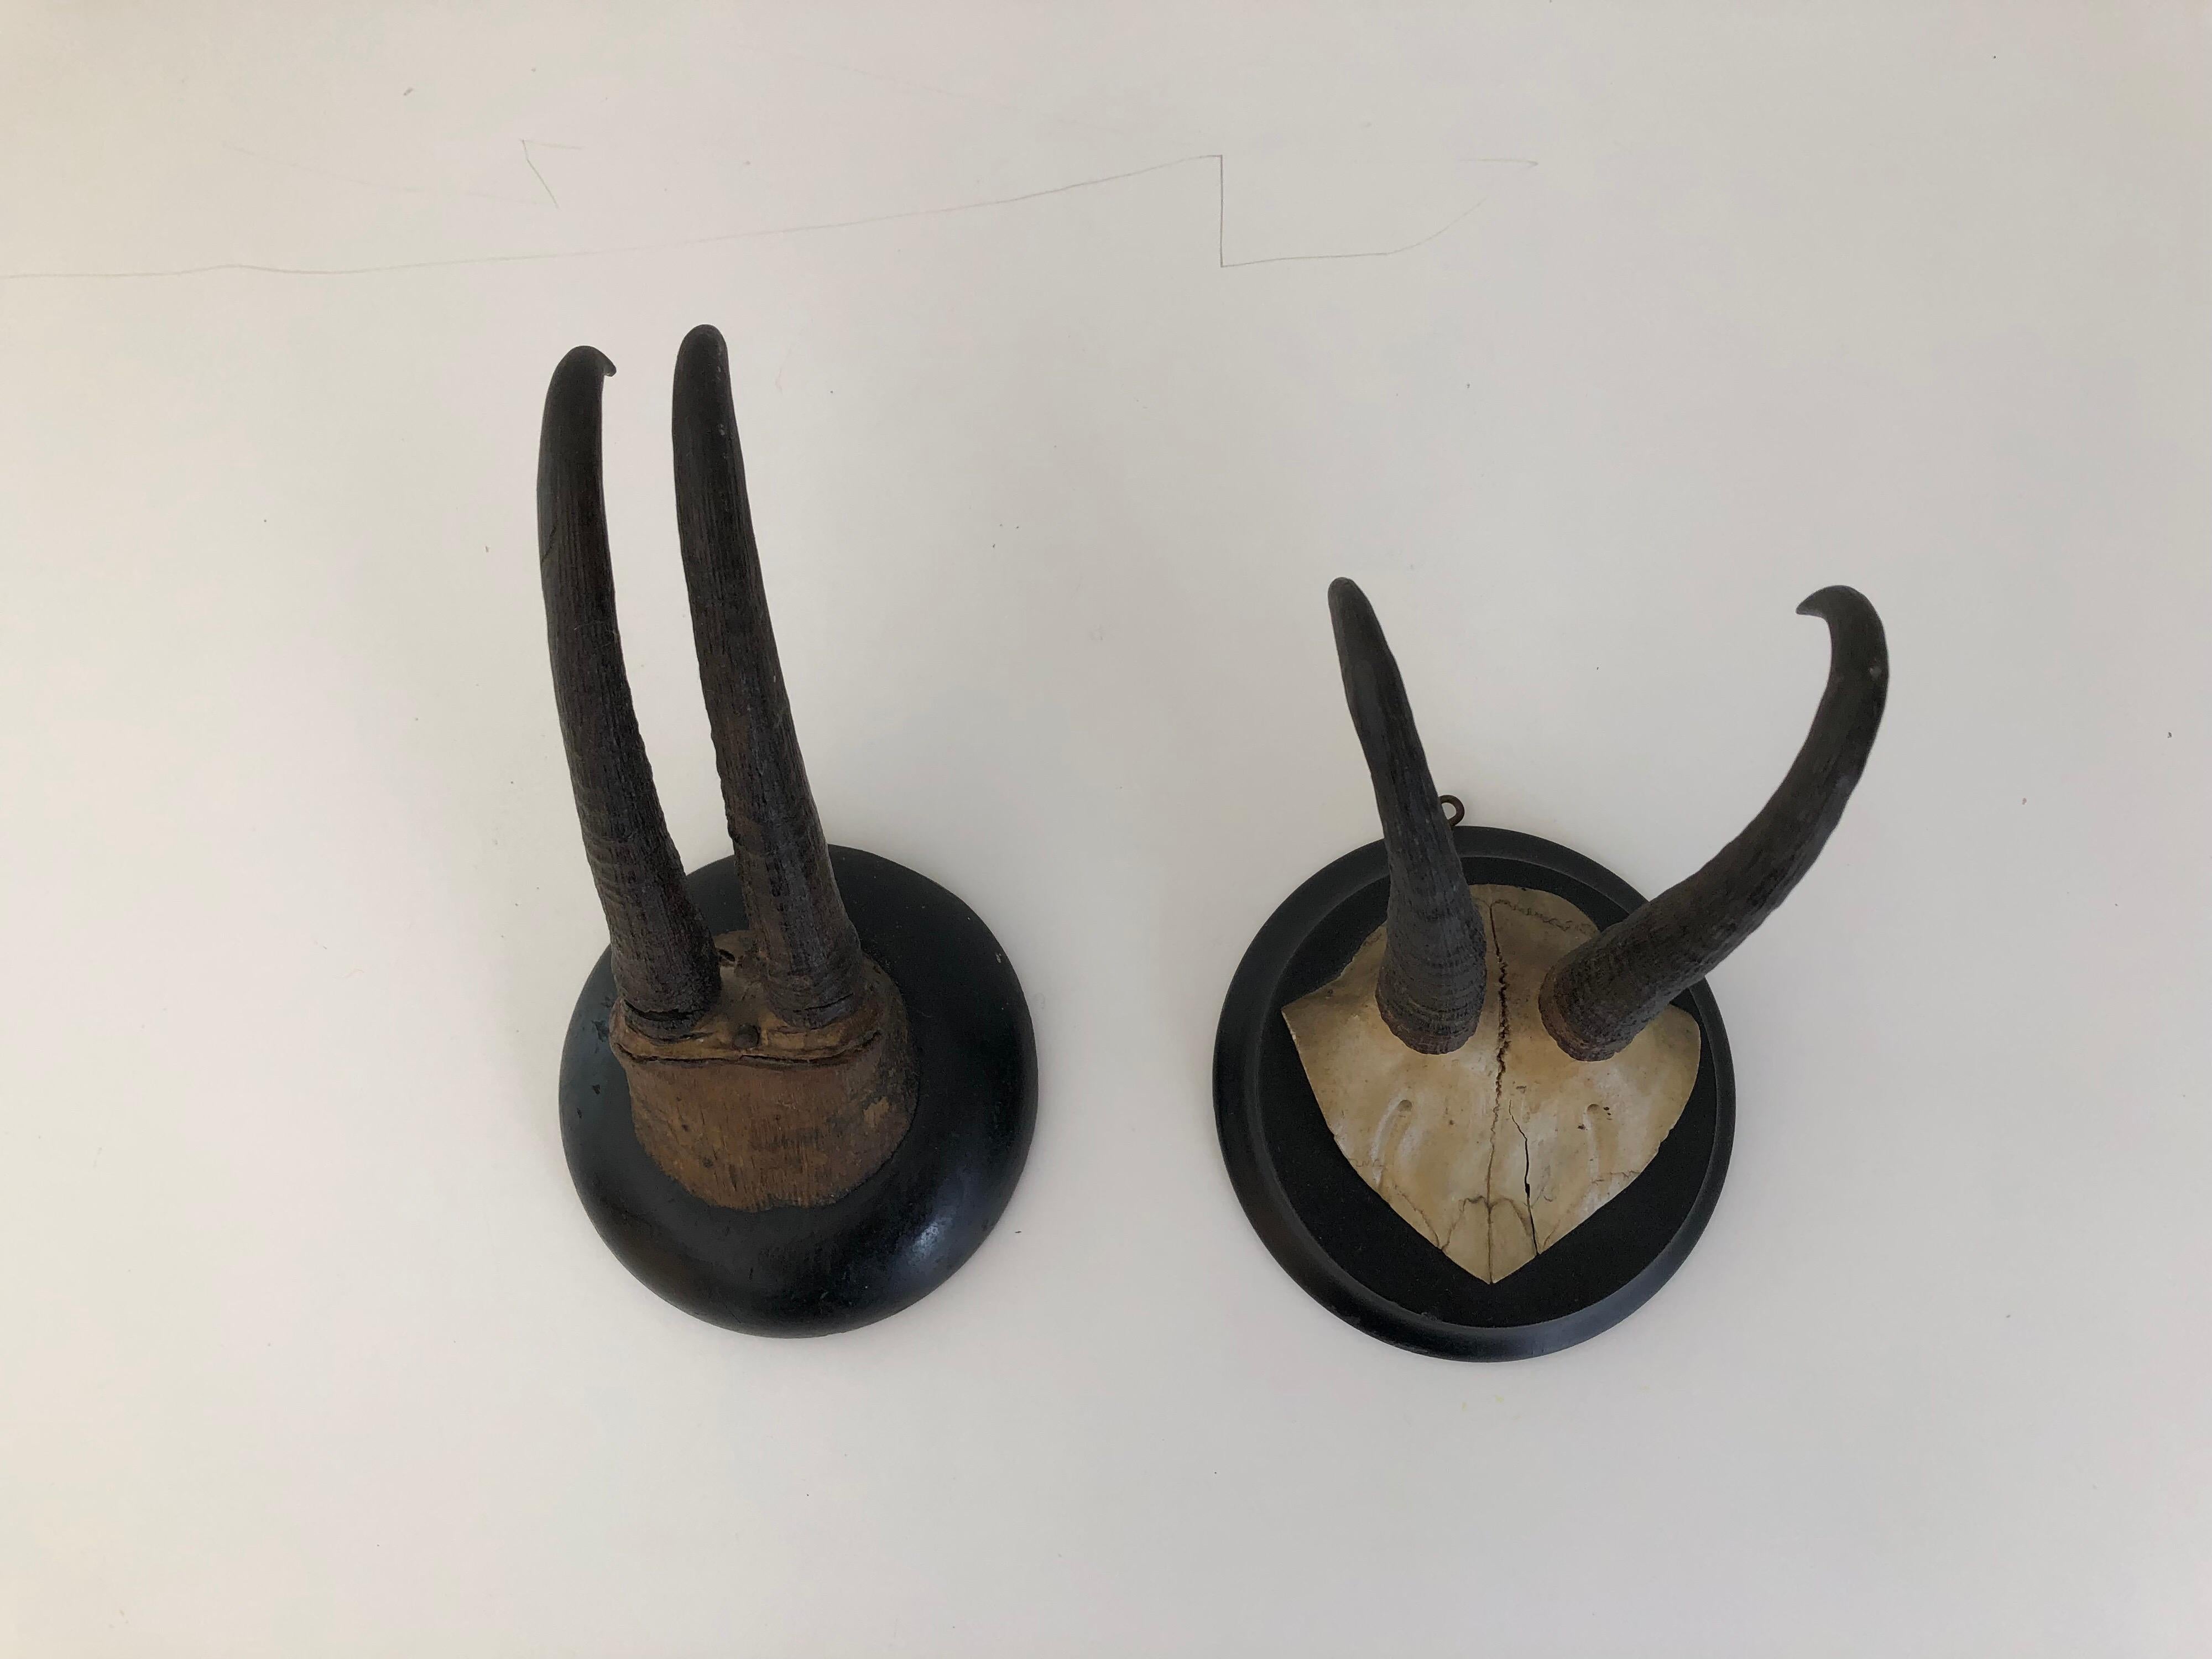 A pair of antique mounted horns. Coordinating mounts and style.